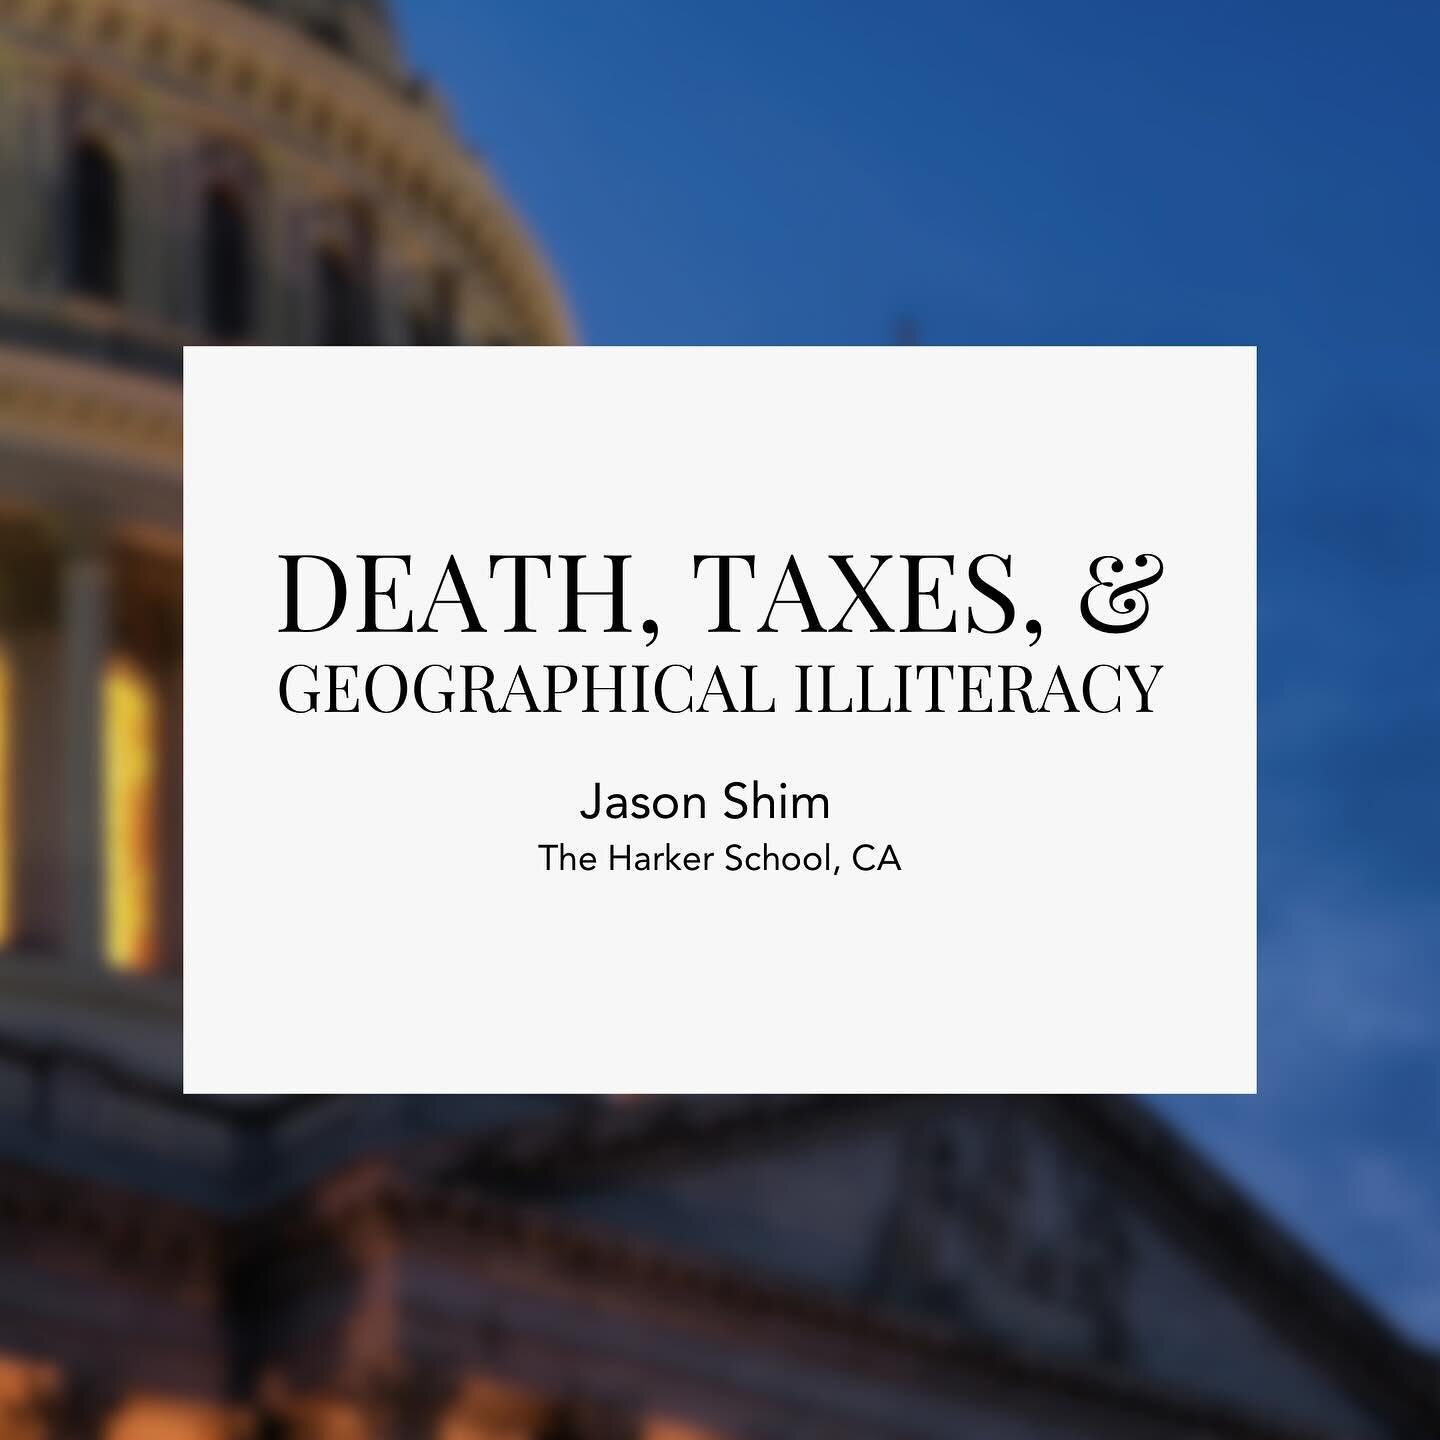 Death? Taxes? And geographical illiteracy? Jason illustrates the relationship between these seemingly unconnected ideas in his article. Read it in our February issue at culturator.org/issues 
.
.
.
#CulturatorCraftsChange